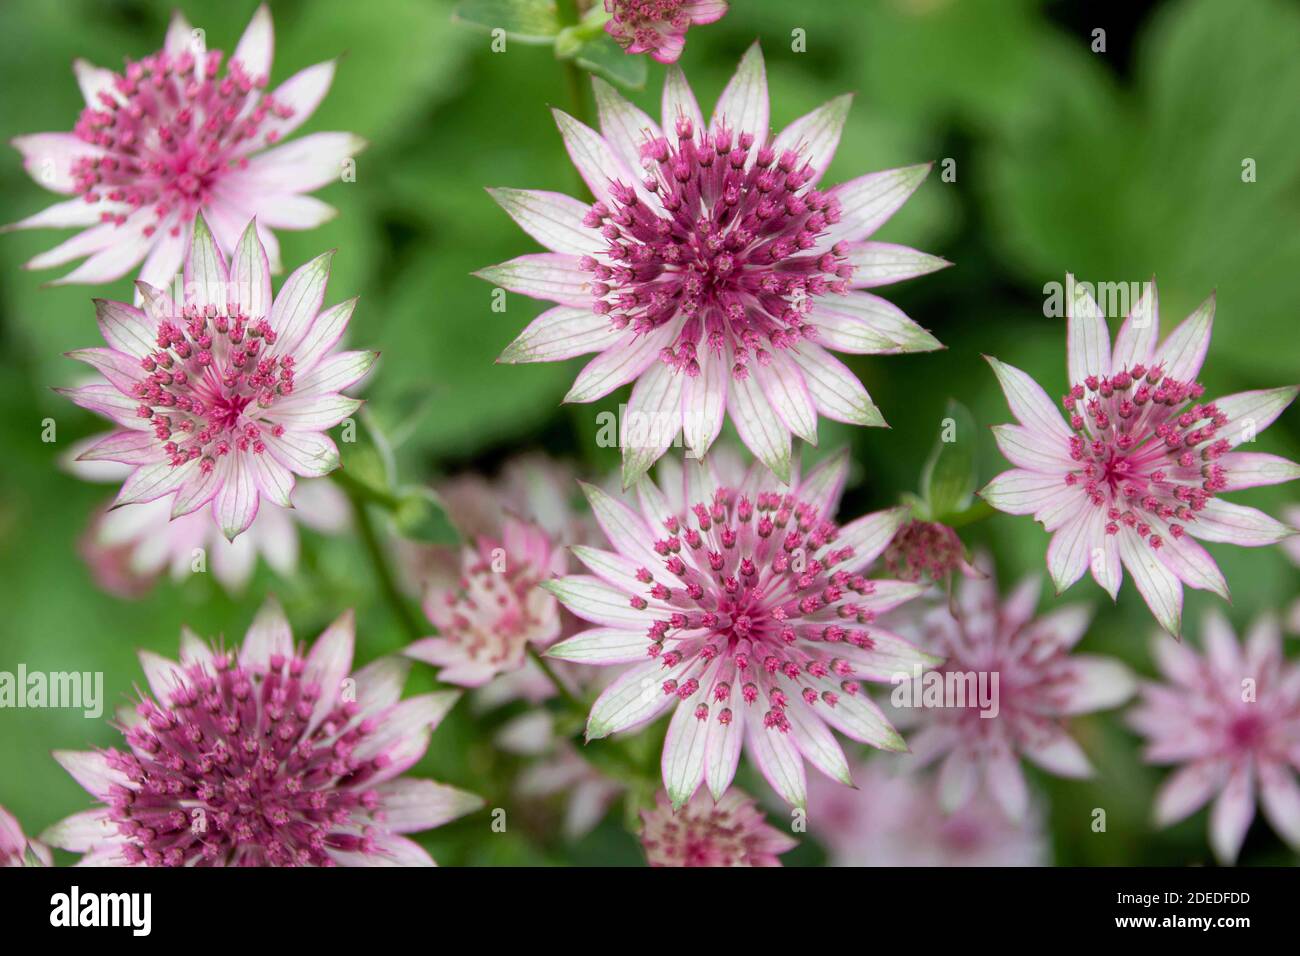 Astrantias, also known as Hattie's pincushion or masterwort, are charming perennials with branched heads of neat pincushion flowers Stock Photo